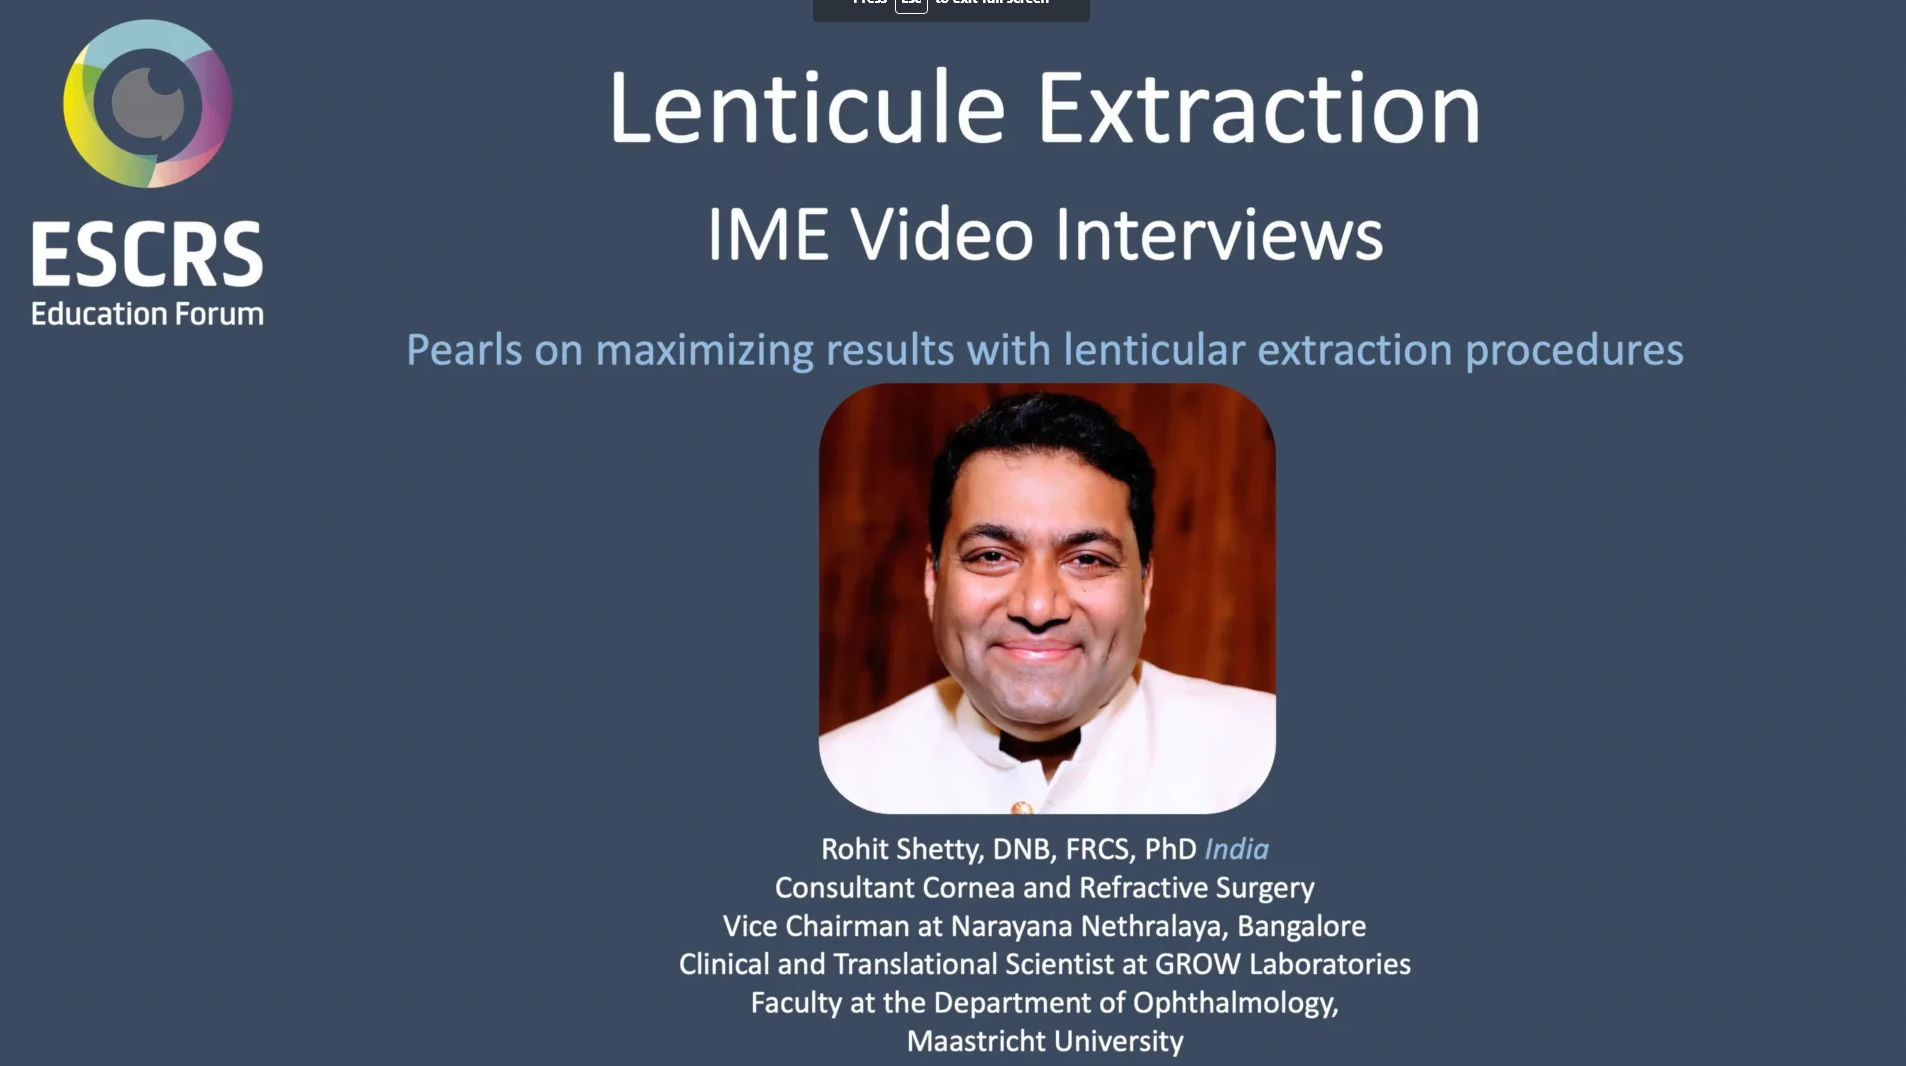 Podcast Interviews: Lenticule Extraction - Rohit Shetty 